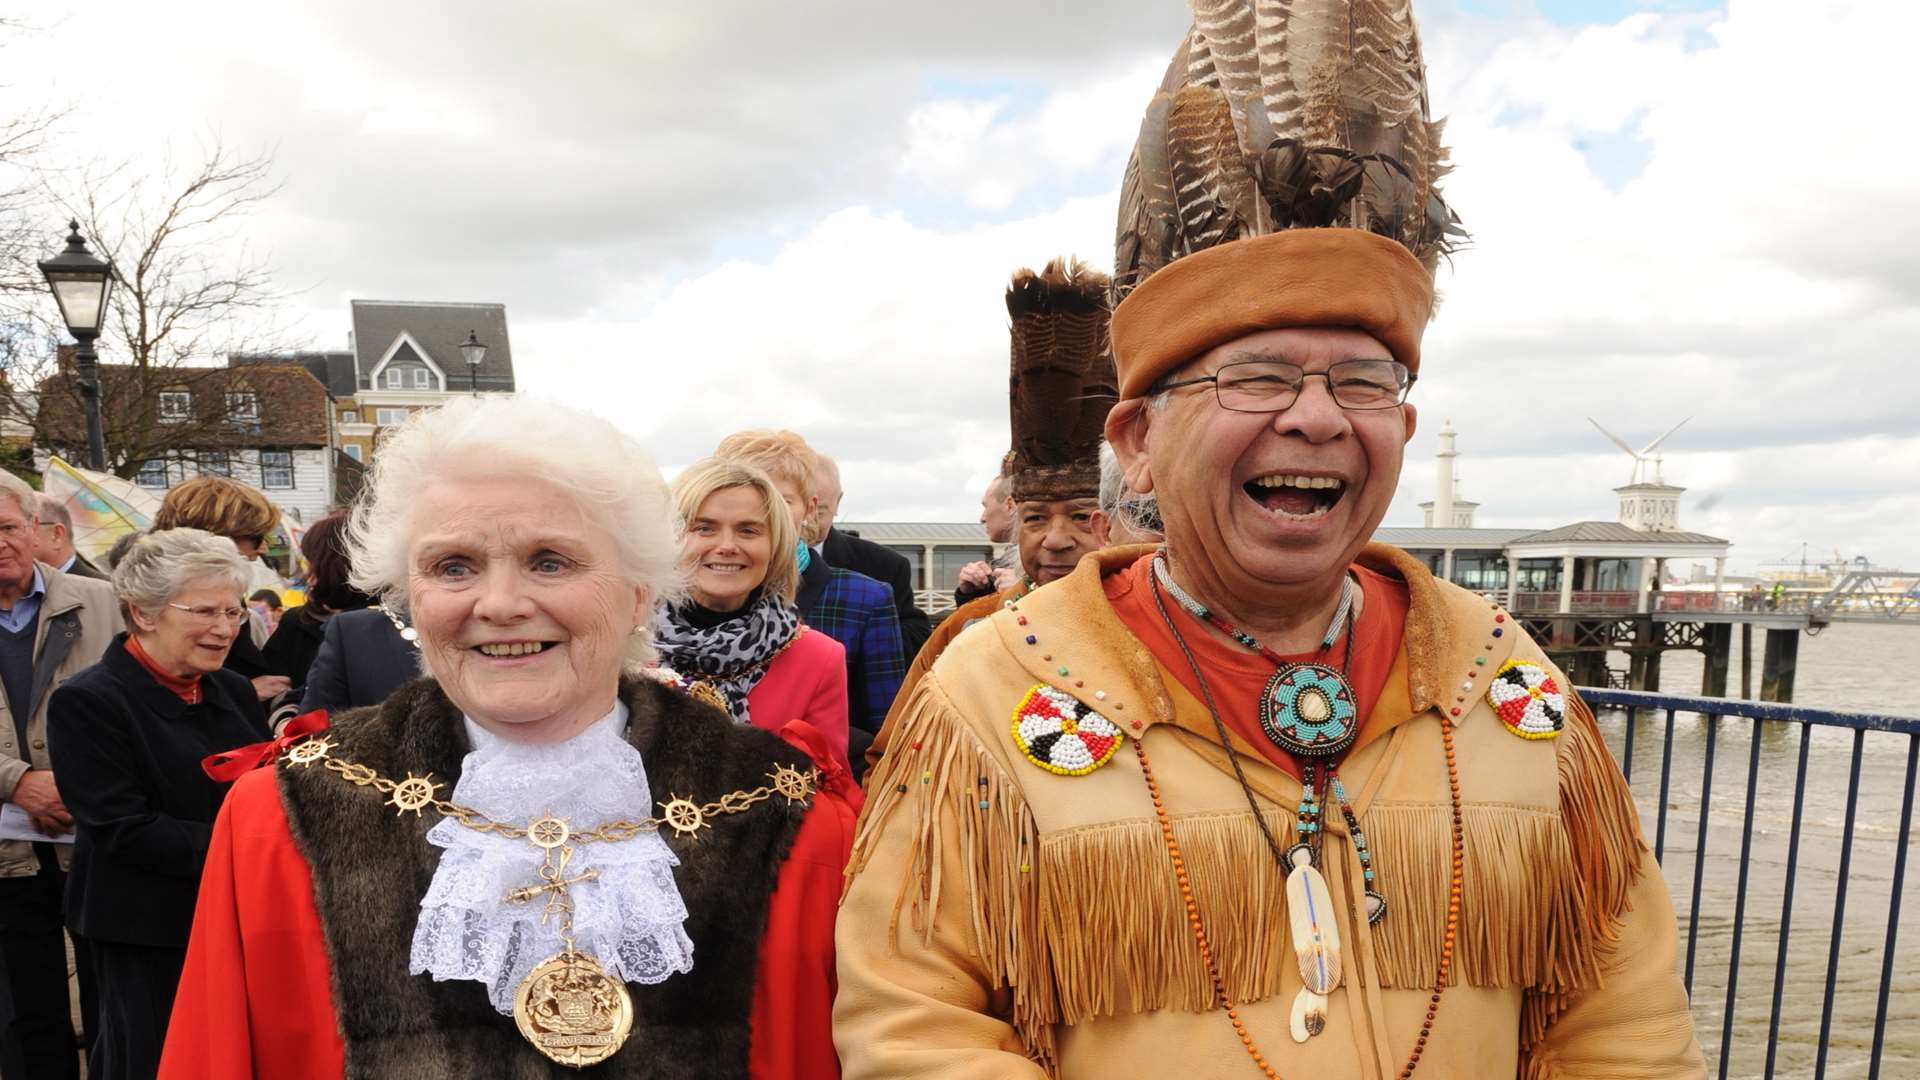 Cllr Greta Goatley took part in celebrations to mark the 400th anniversary of Pocahontas' death. Picture: Steve Crispe